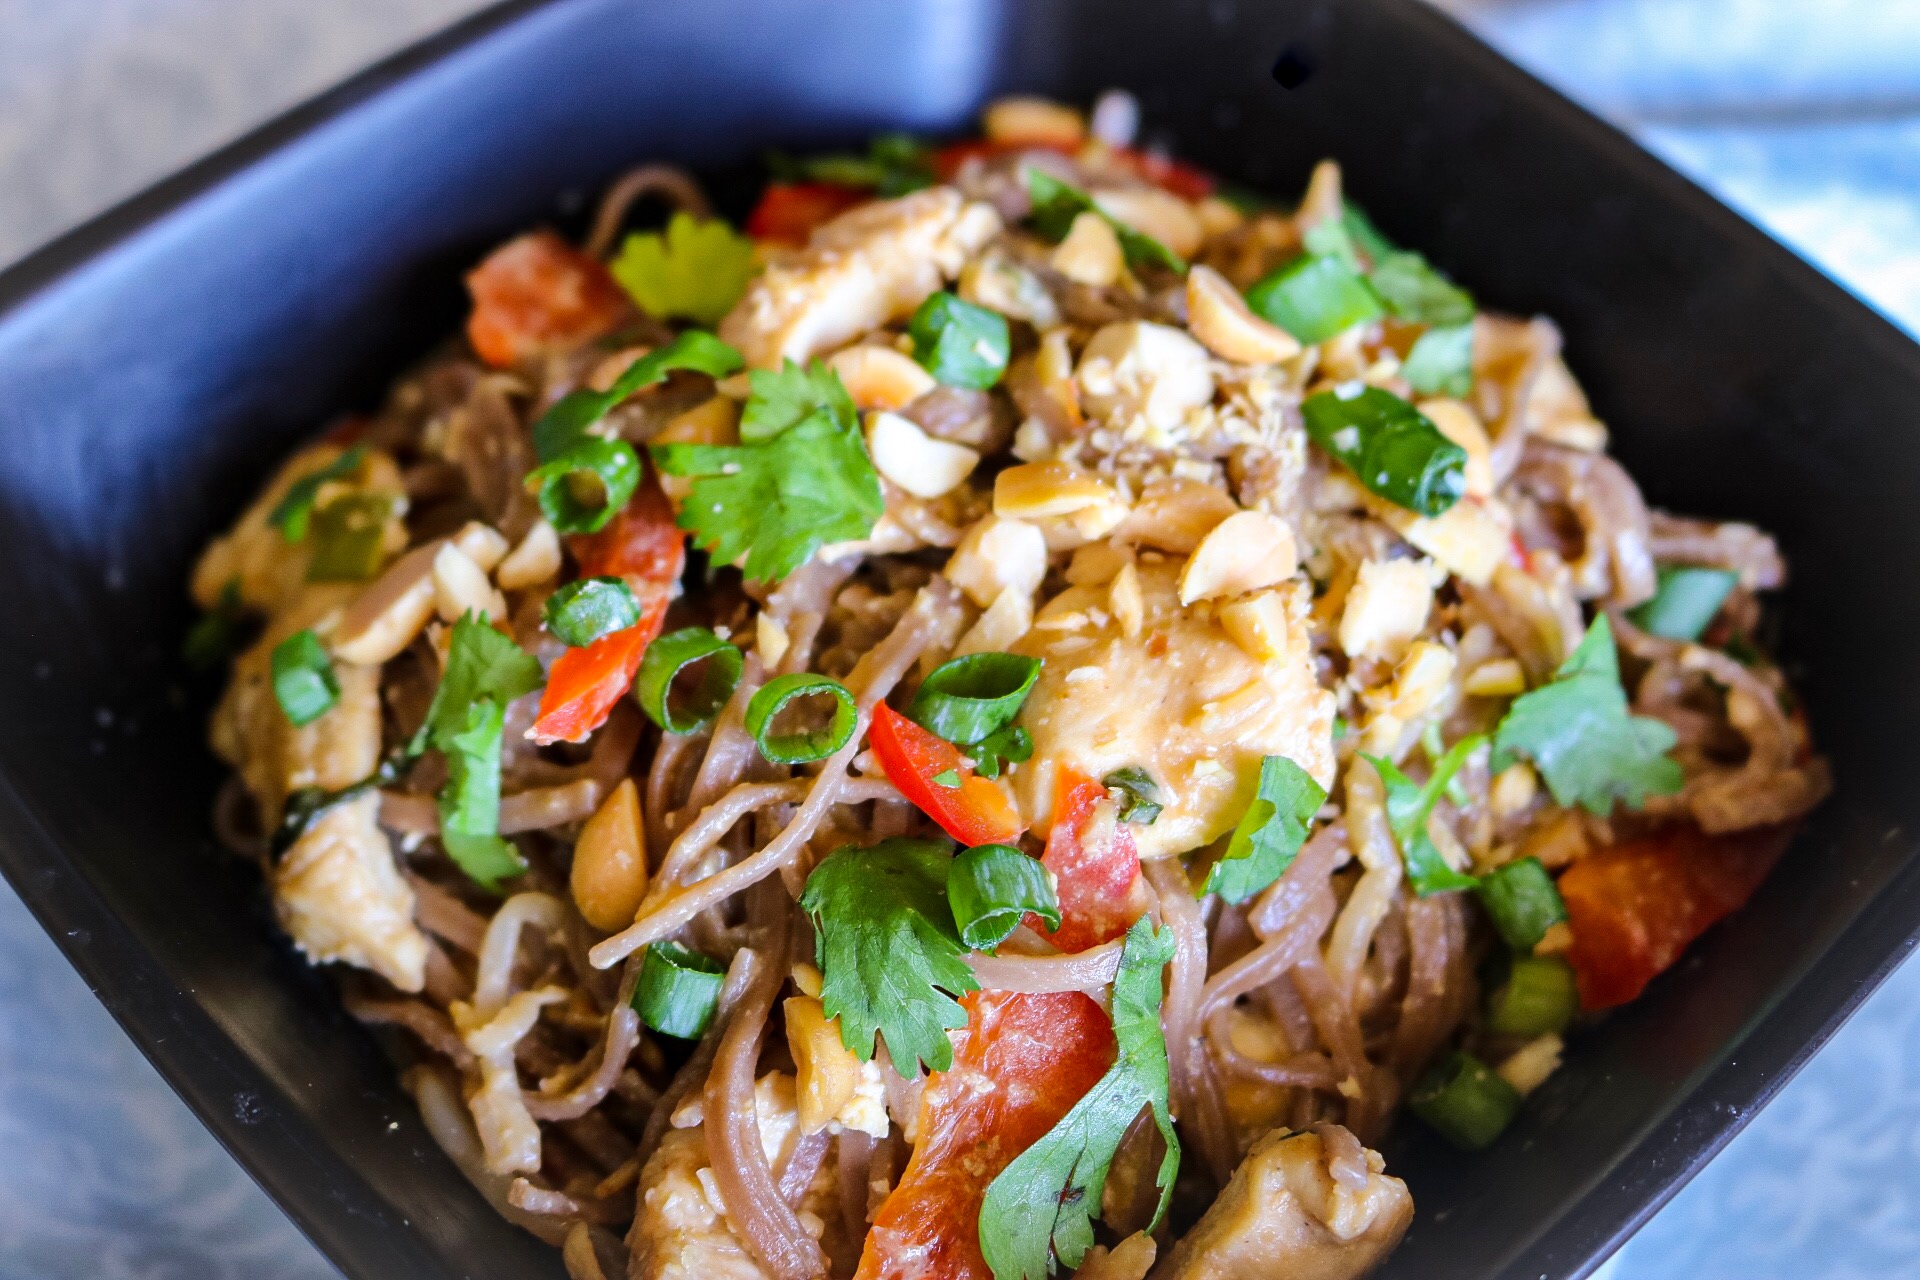 Pad Thai Recipe (ผัดไทย) - Part One: The Pan - SheSimmers